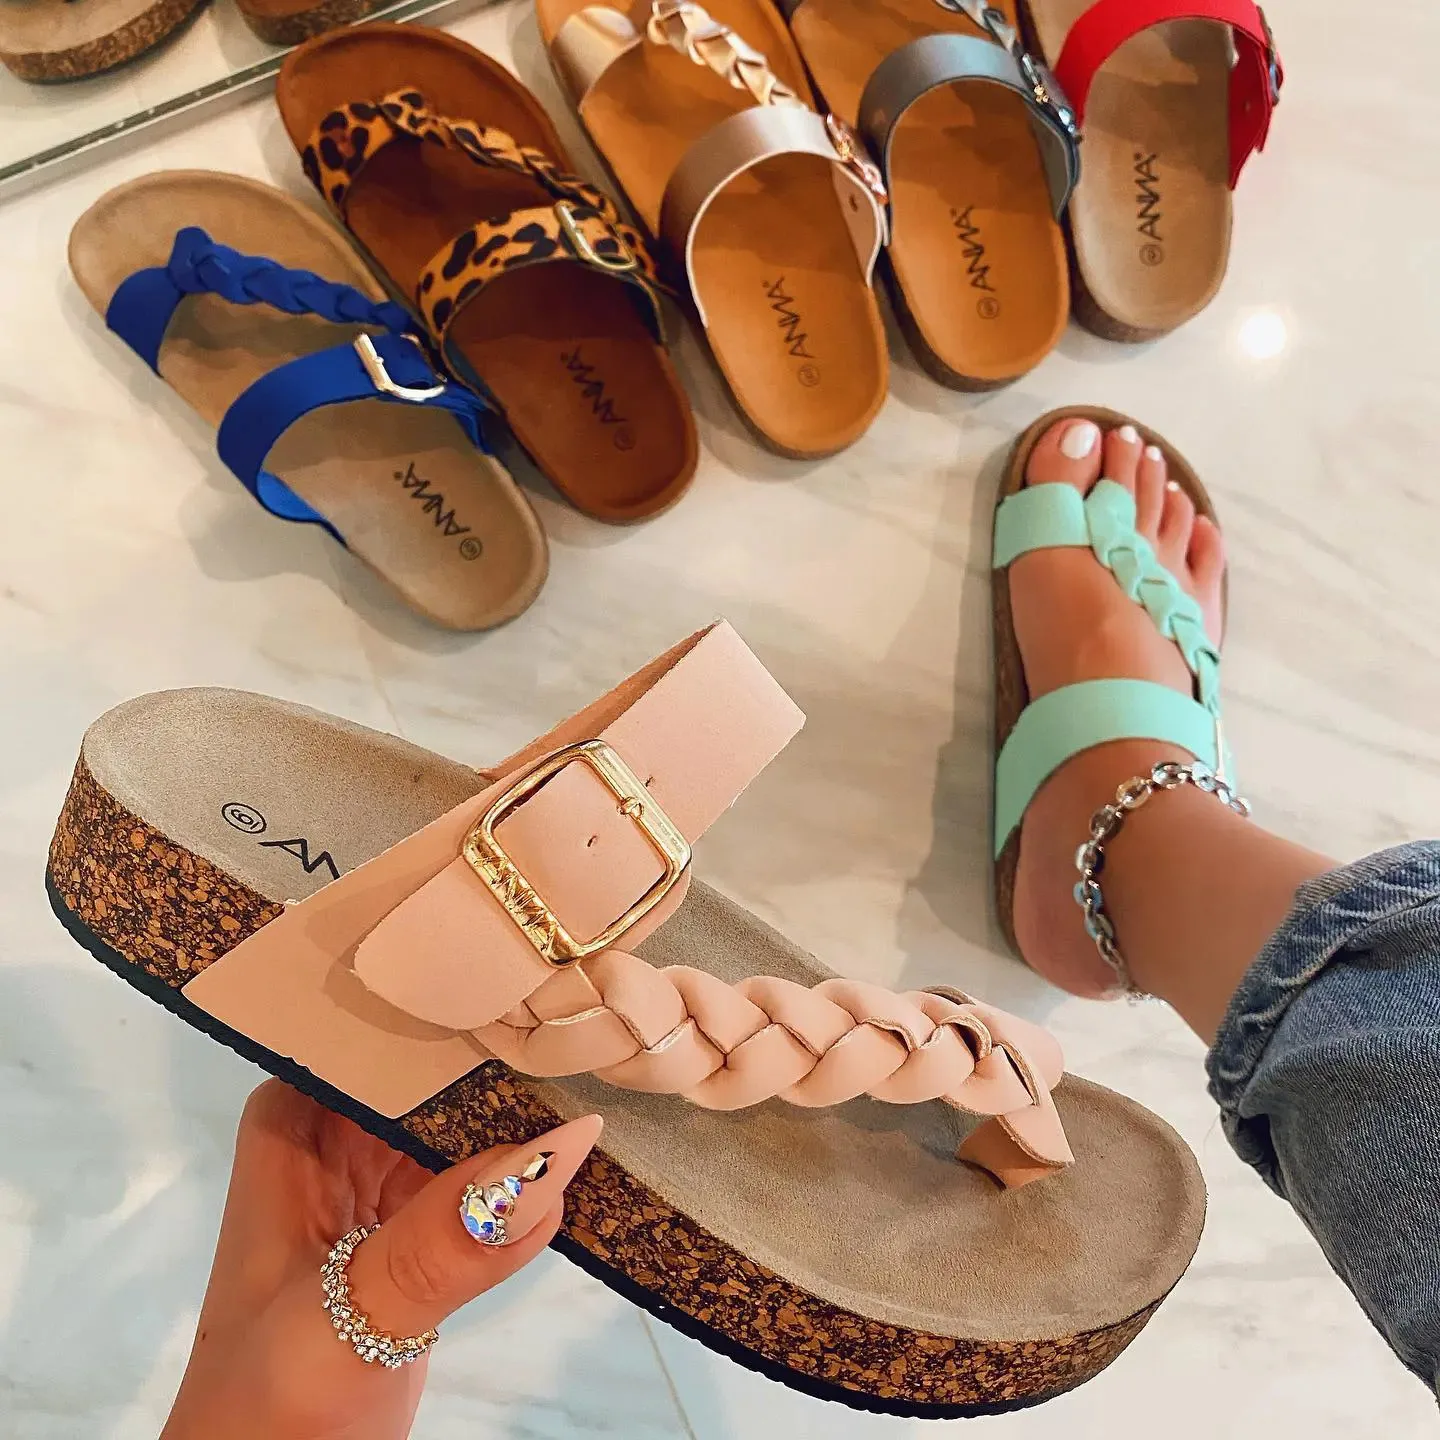 

New Style Slipper Shoes Women Pu Leather Buckle Double Strap Slides Slippers EVA Sole Cork Beach Sandals Flip-Flops Slippers